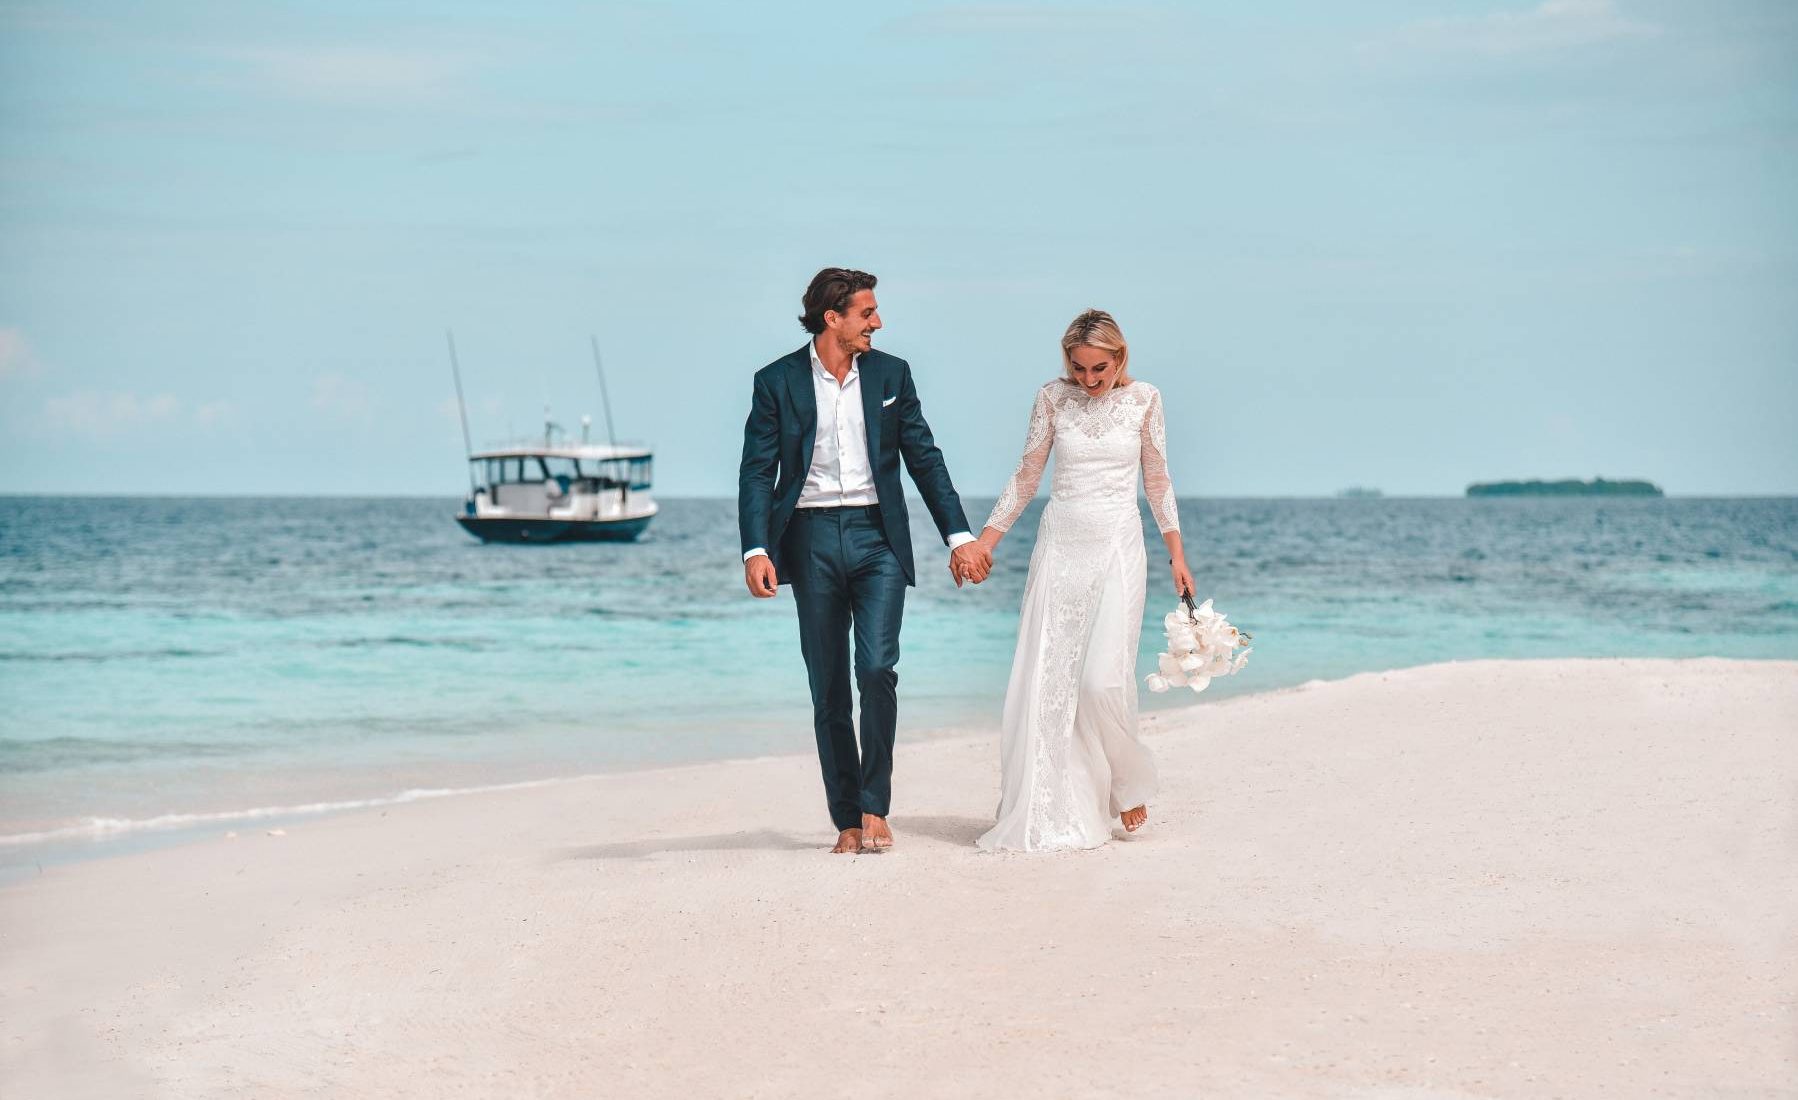 Raffles Maldives Meradhoo - A marriage made in paradise